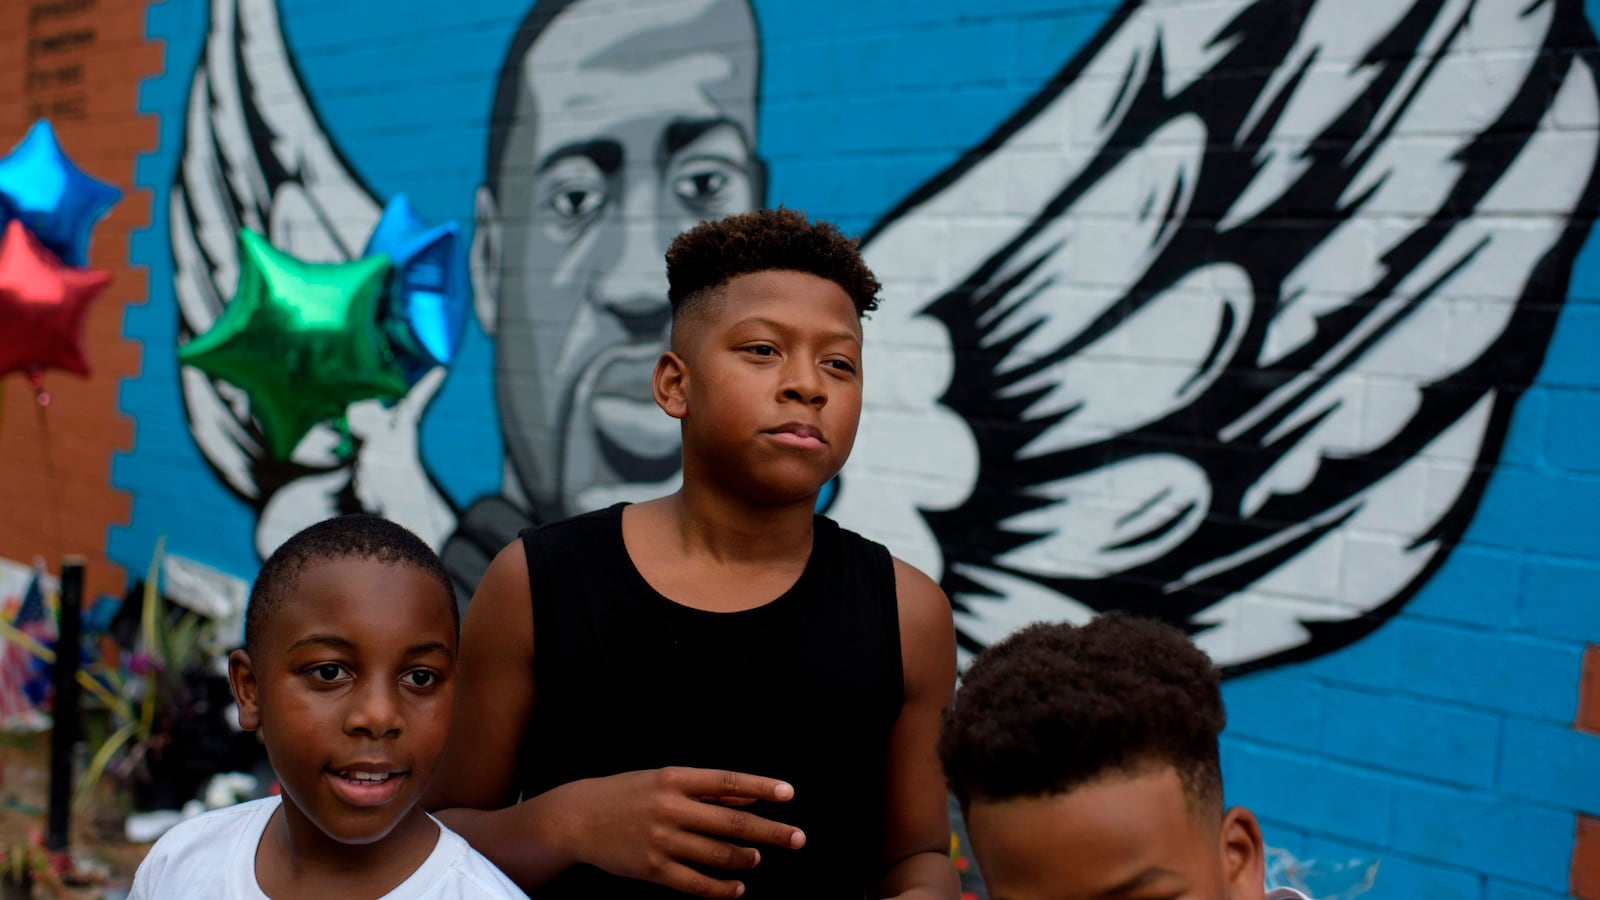 Three boys, one in a black tank top and two wearing white t-shirts, stand in front of a blue mural in honor of George Floyd. The mural has Floyd’s portrait with angel wings on either side.